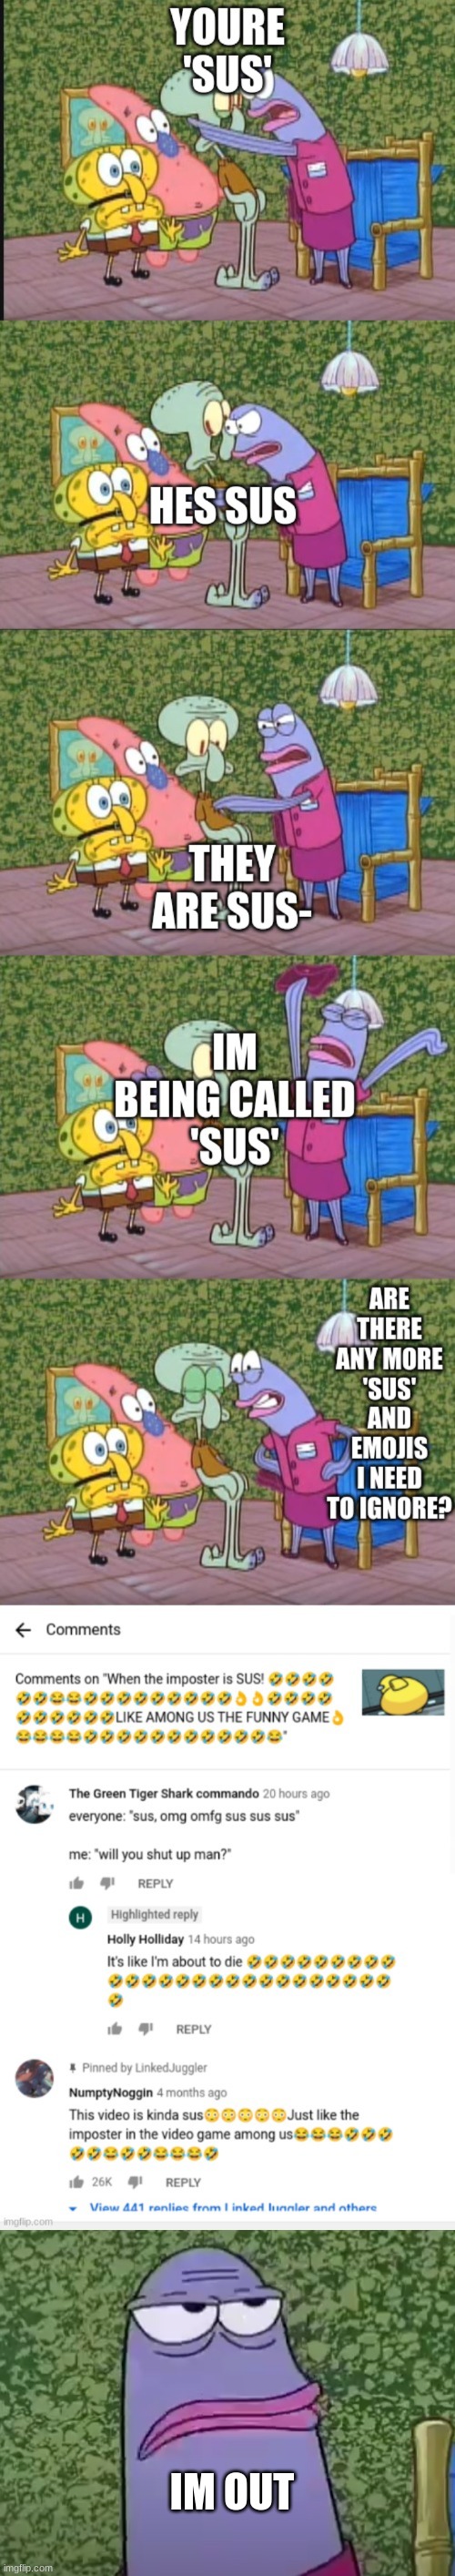 "ARE THERE ANY MORE ANNOYING TRENDS I NEED TO IGNORE?" | IM OUT | image tagged in im out,spongebob meme,squidward,memes,trends,shitpost | made w/ Imgflip meme maker